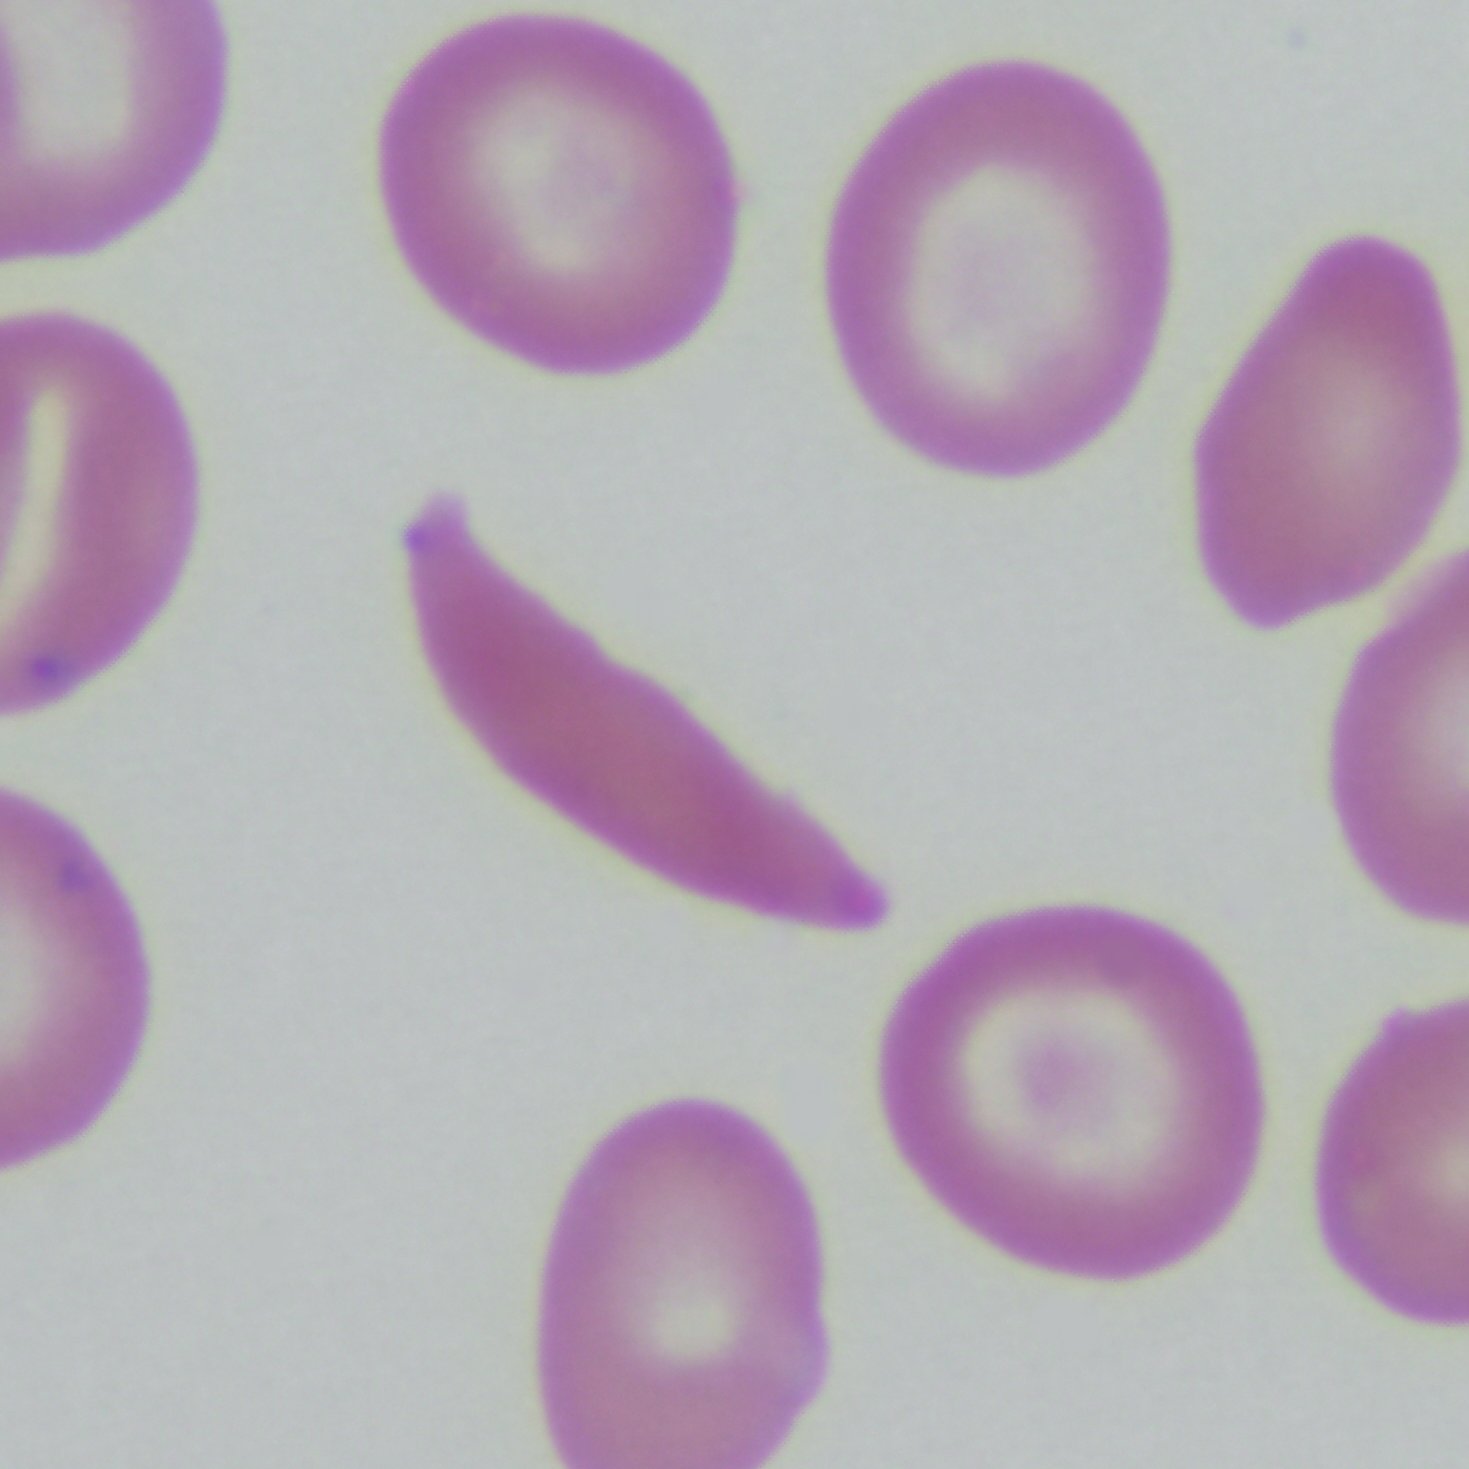 Photomicrograph of normal-shaped and sickle-shape red blood cells from a patient with sickle cell disease